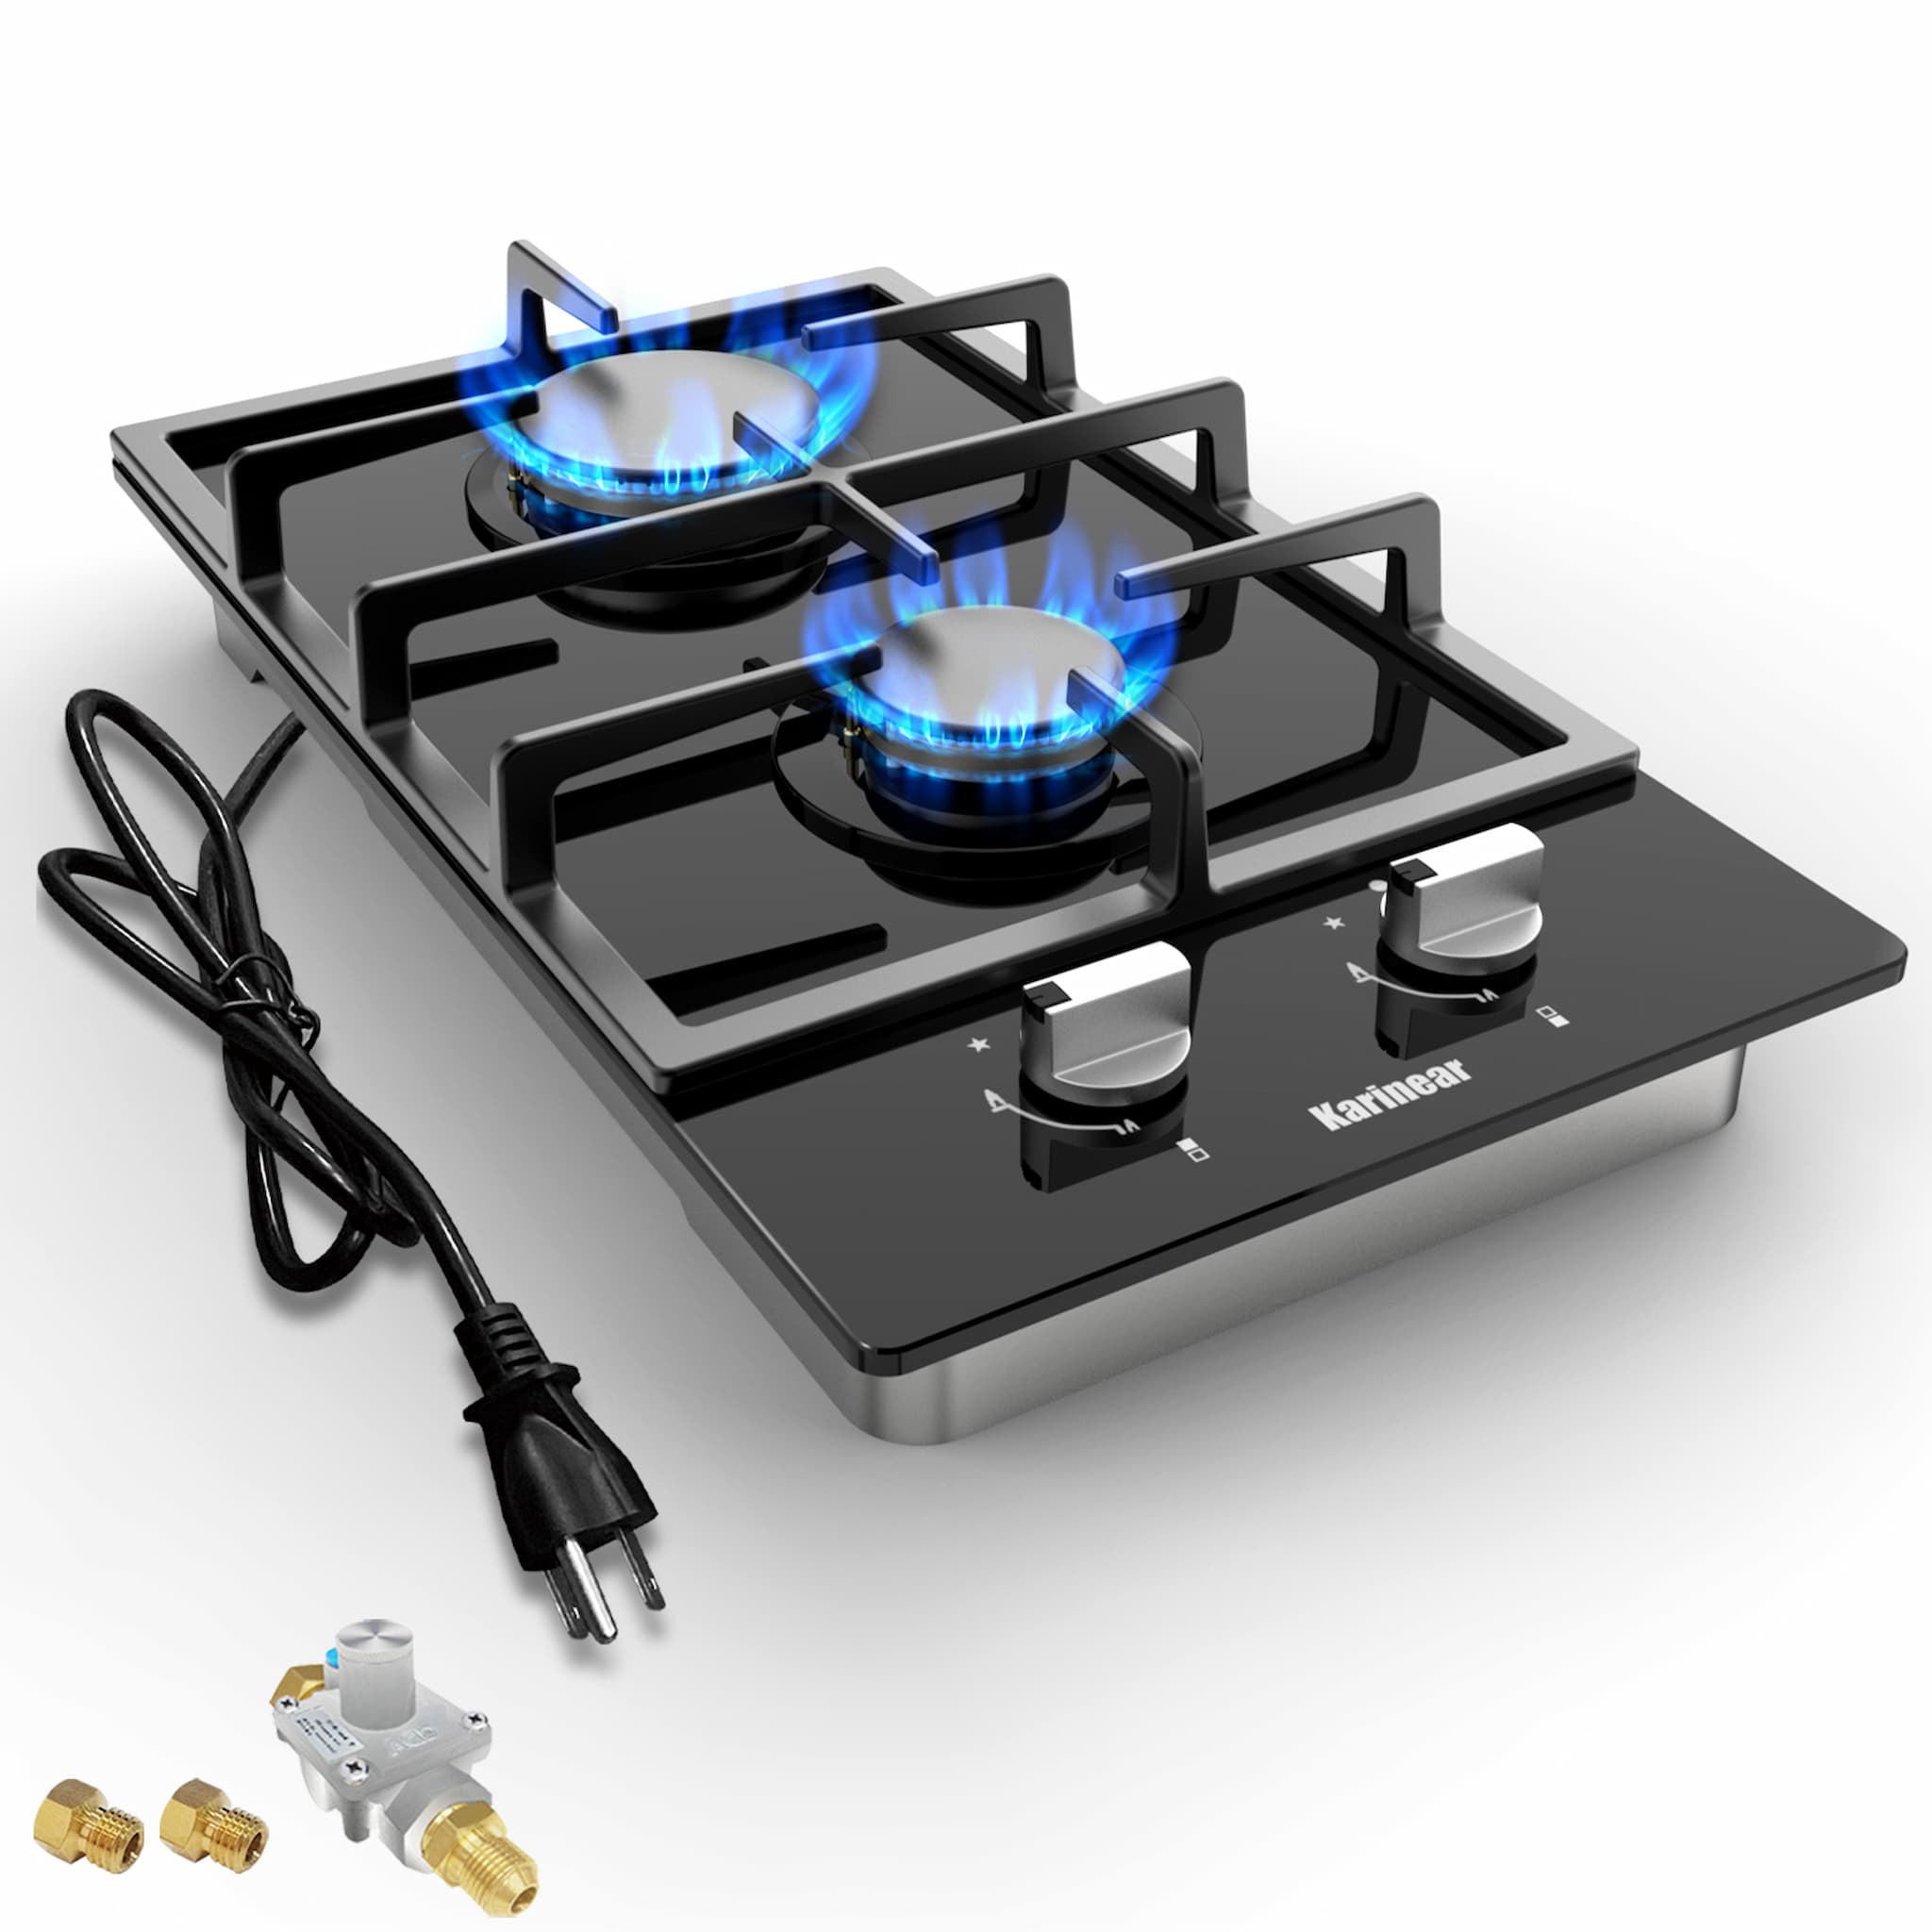 Karinear Tempered Glass Gas Cooktop, 12 In Gas Stove Top Gas Cooktop 2 Burners